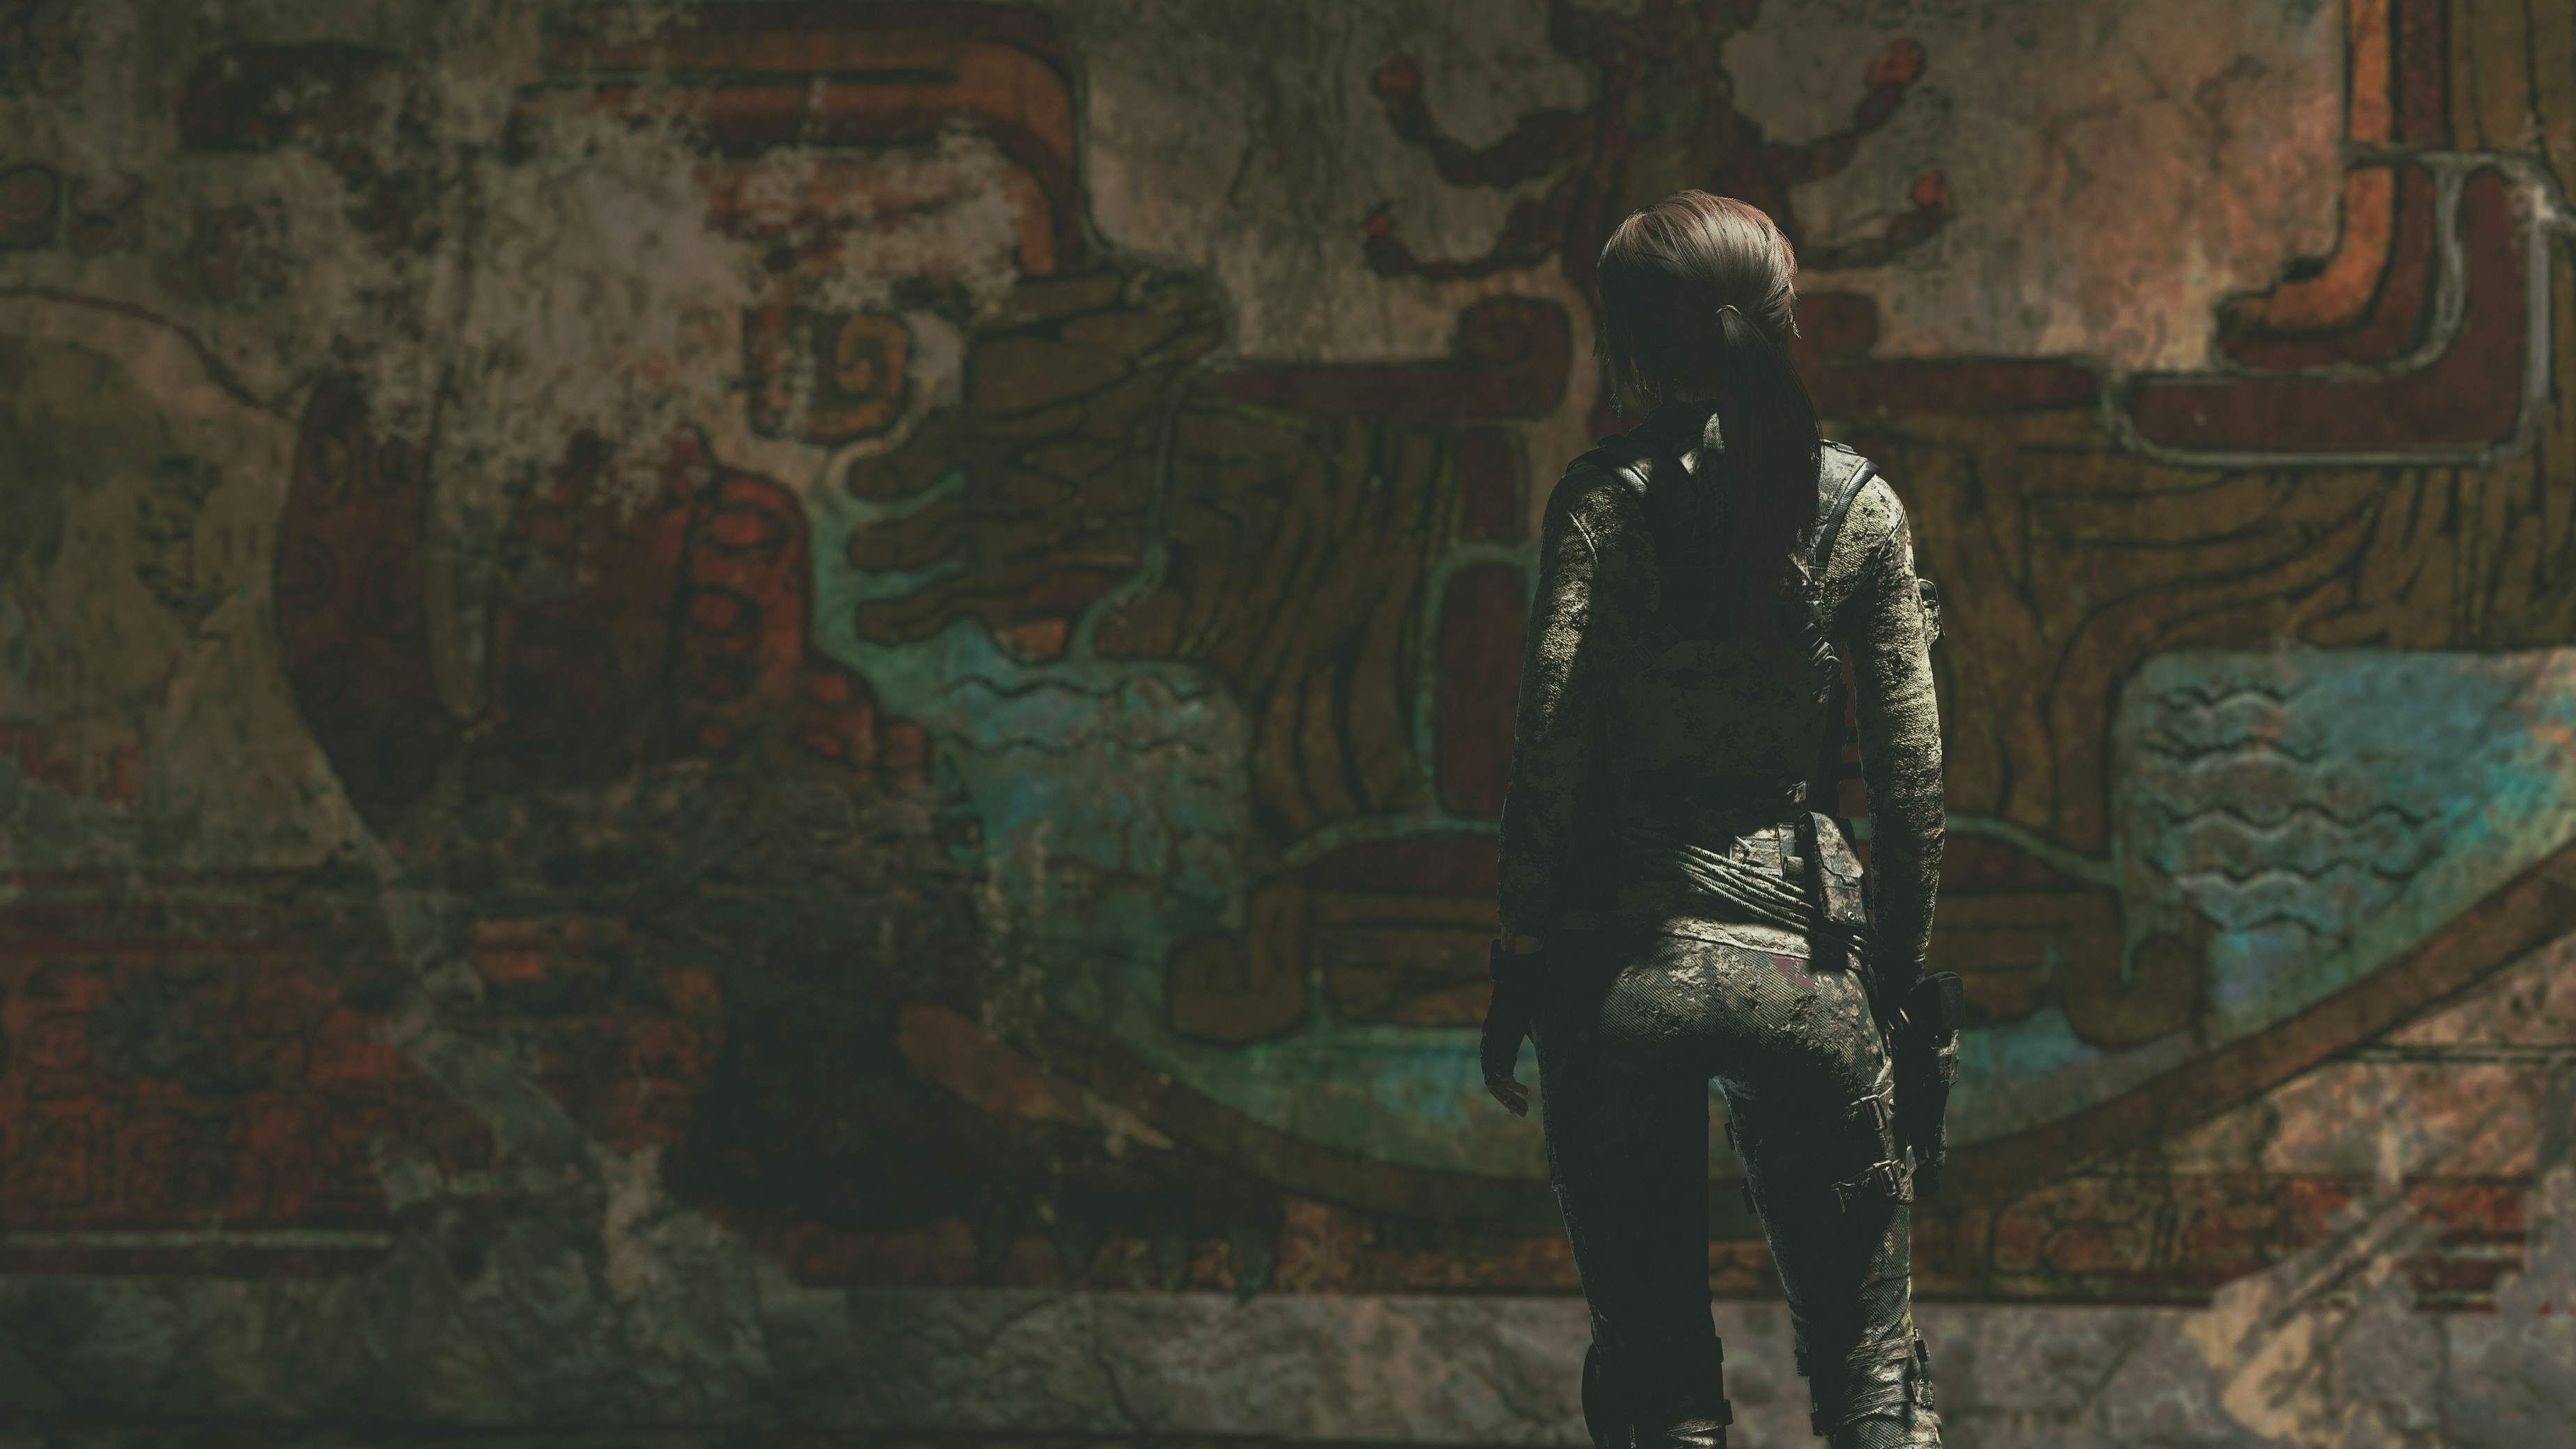 3440x1440p shadow of the tomb raider wallpapers